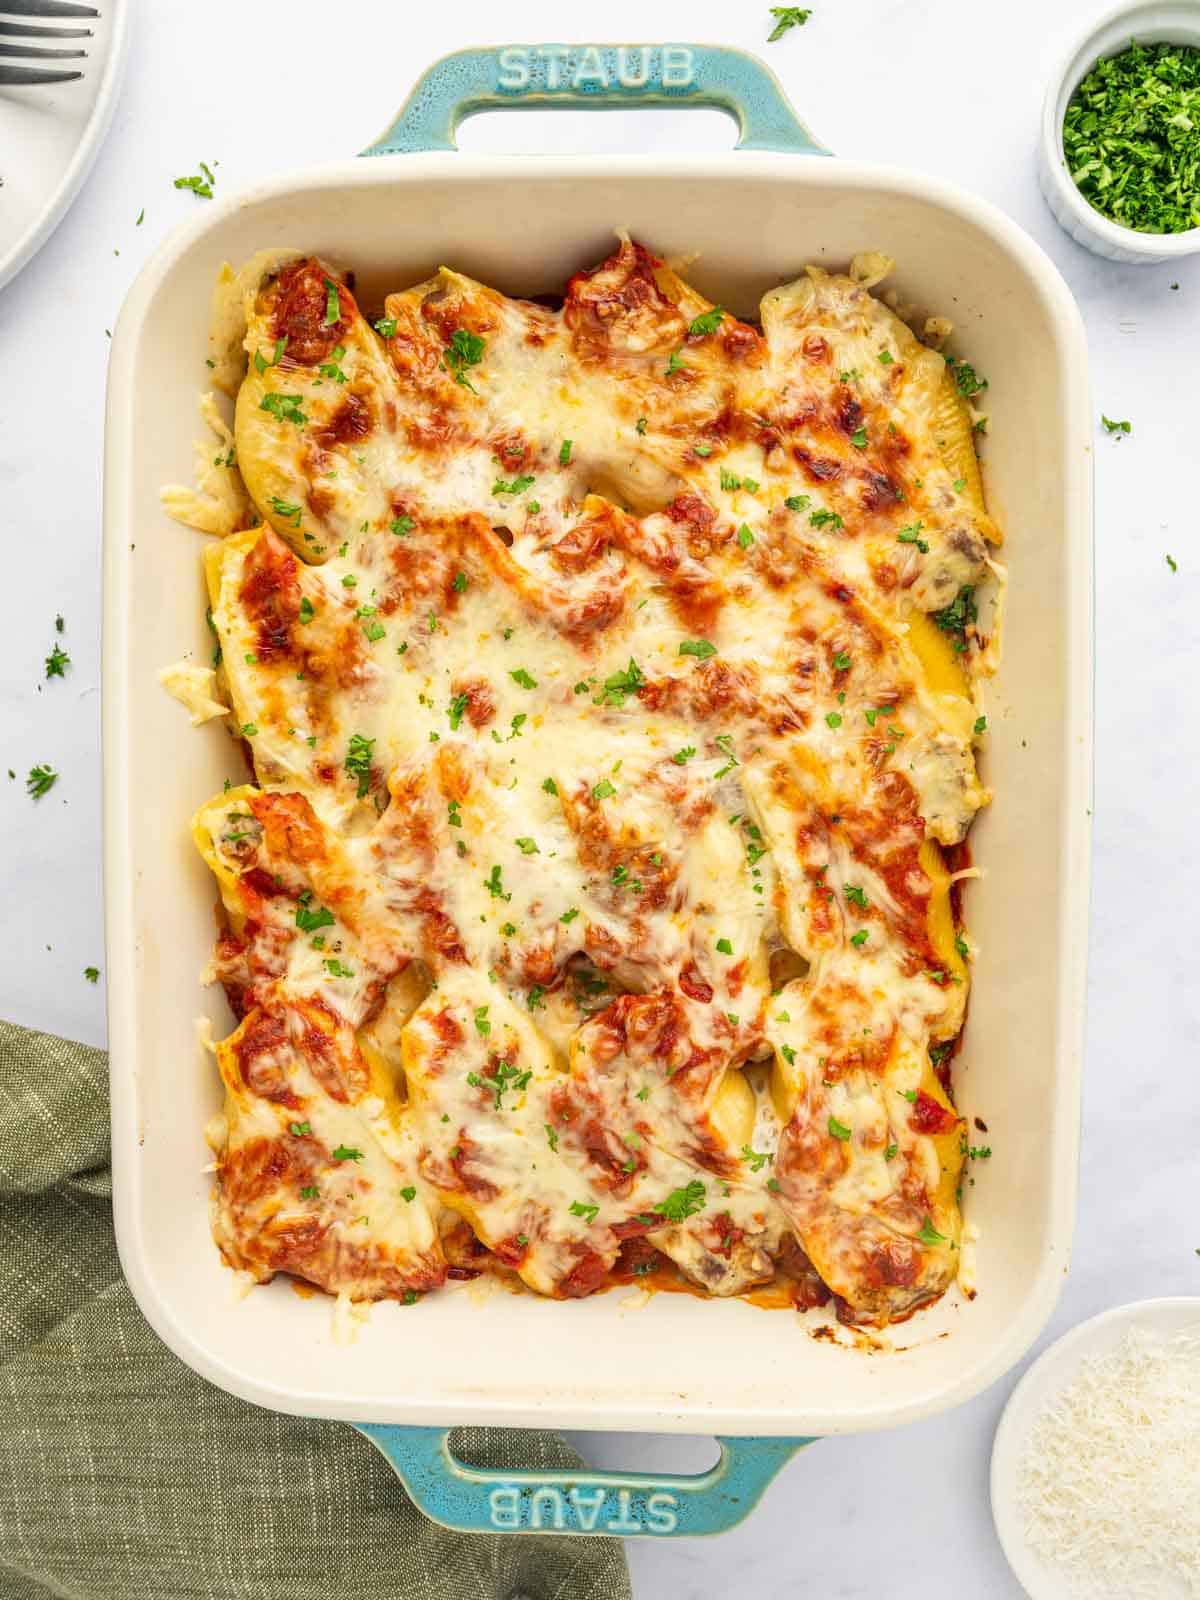 A pan of stuffed pasta shells filled with beef and cheese.